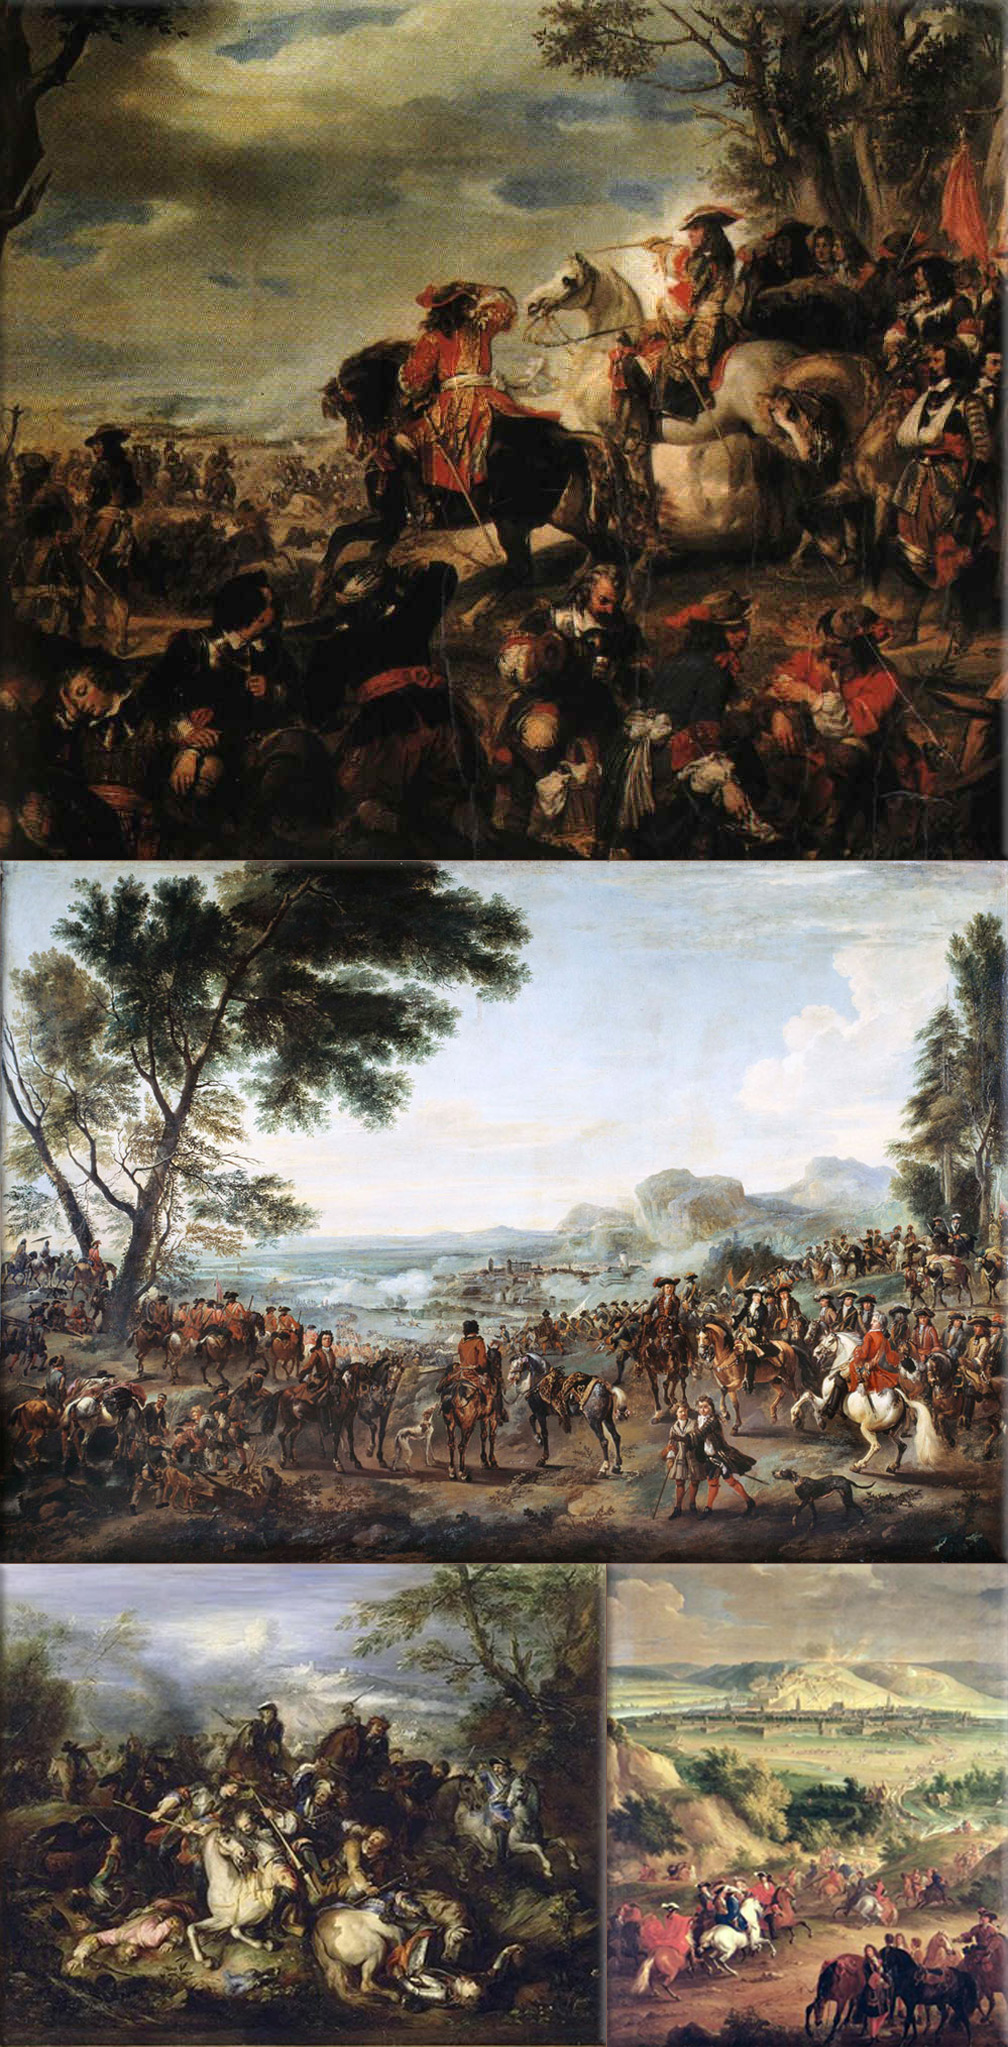 Nine Years' War (War of the Grand Alliance, the War of the Palatine Succession, or the War of the League of Augsburg; 1688 – 1697) - was a major war of the late 17th century fought between King Louis XIV of France, and a European-wide coalition, the Grand Alliance, led by the Anglo-Dutch Stadtholder-King William III, Holy Roman Emperor Leopold I, King Charles II of Spain, Victor Amadeus II of Savoy, and the major and minor princes of the Holy Roman Empire